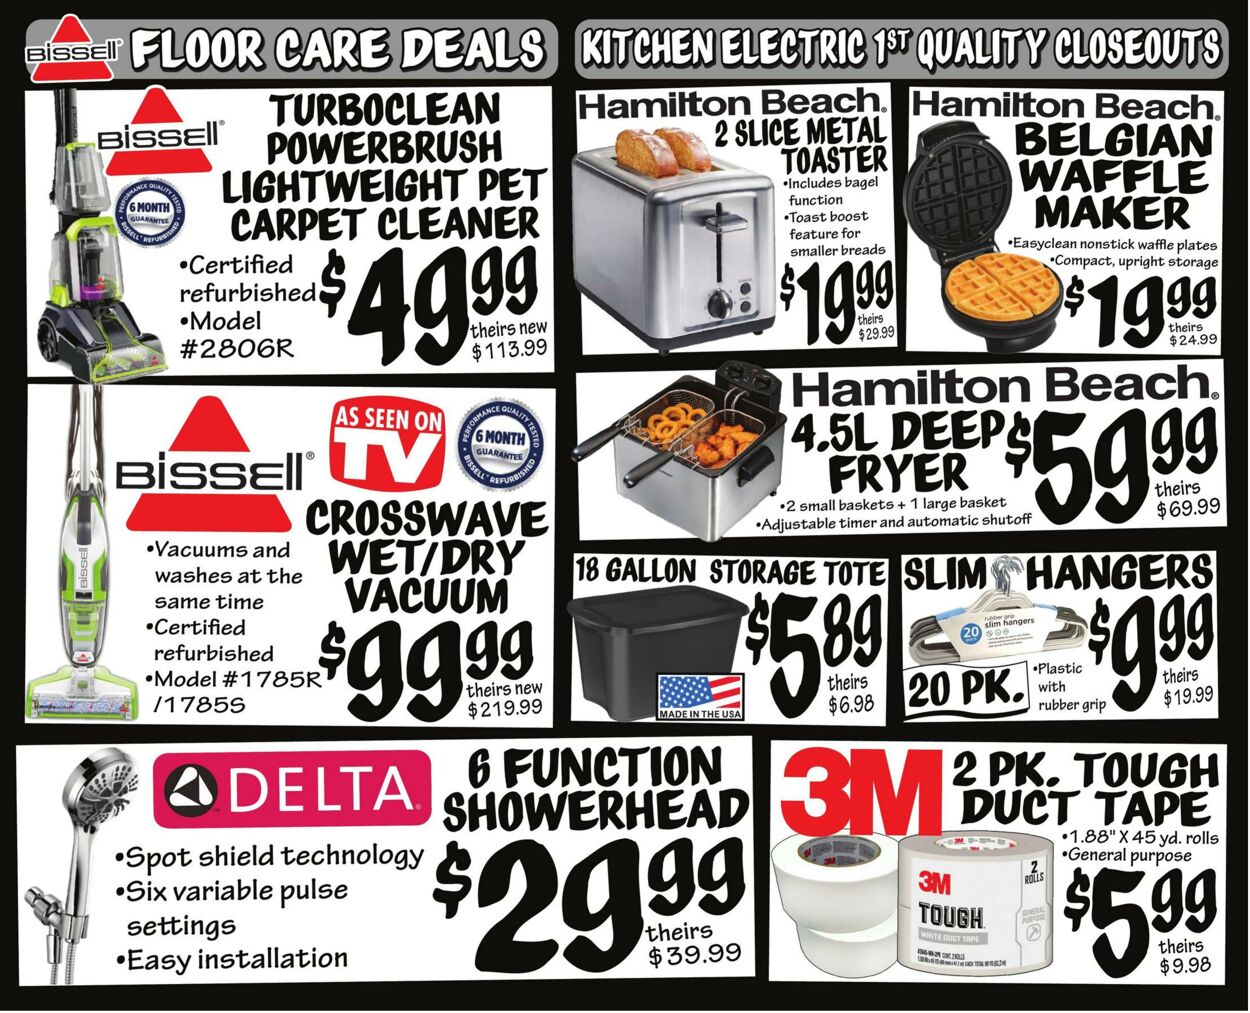 Weekly ad Ollie's 03/29/2023 - 04/05/2023